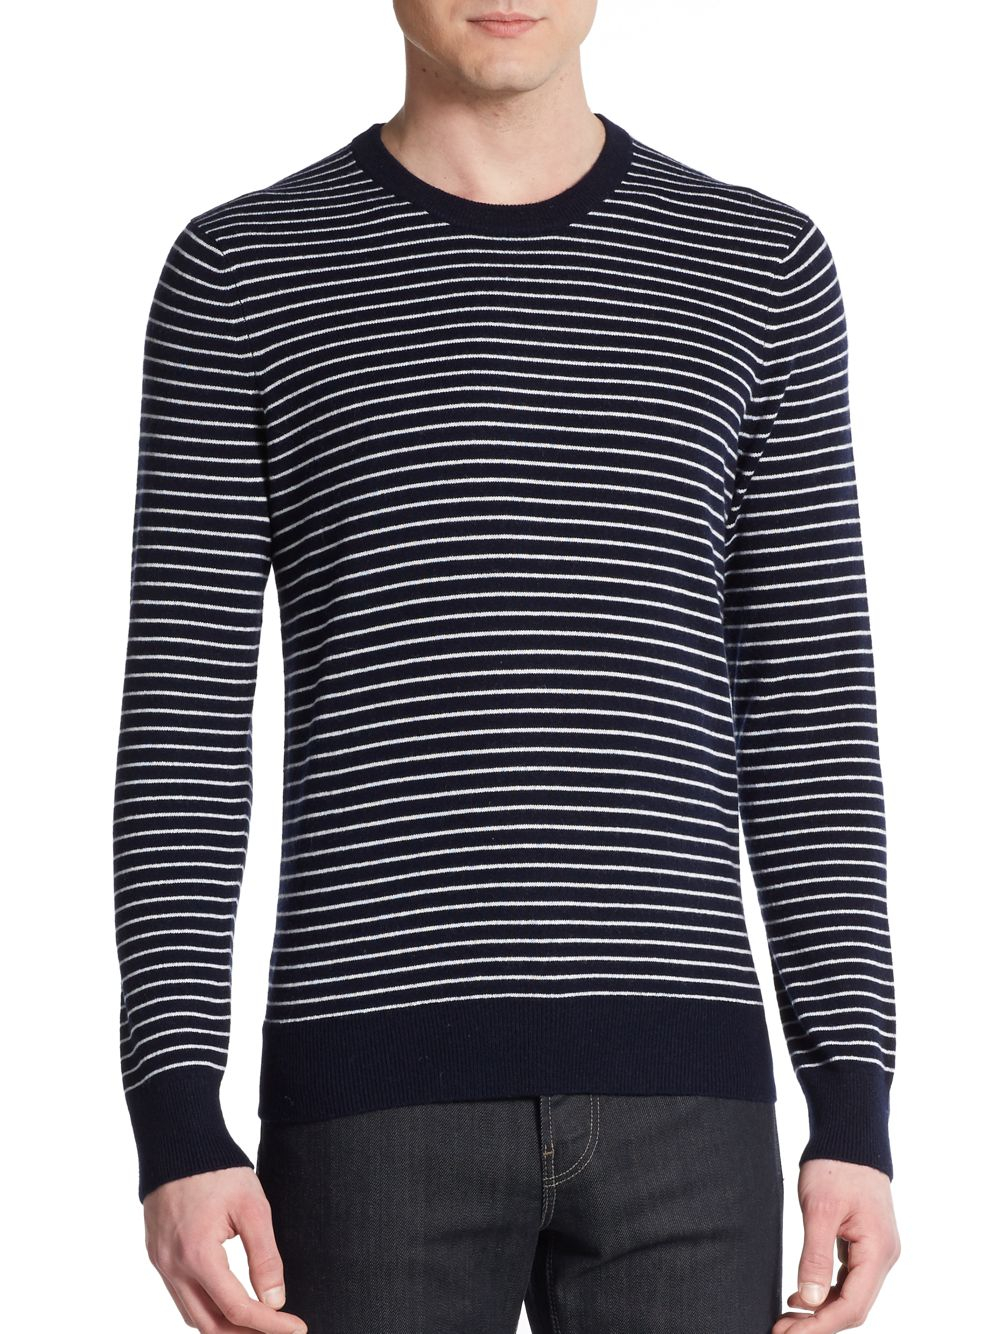 Vince Striped Wool & Cashmere Sweater in Blue for Men - Lyst